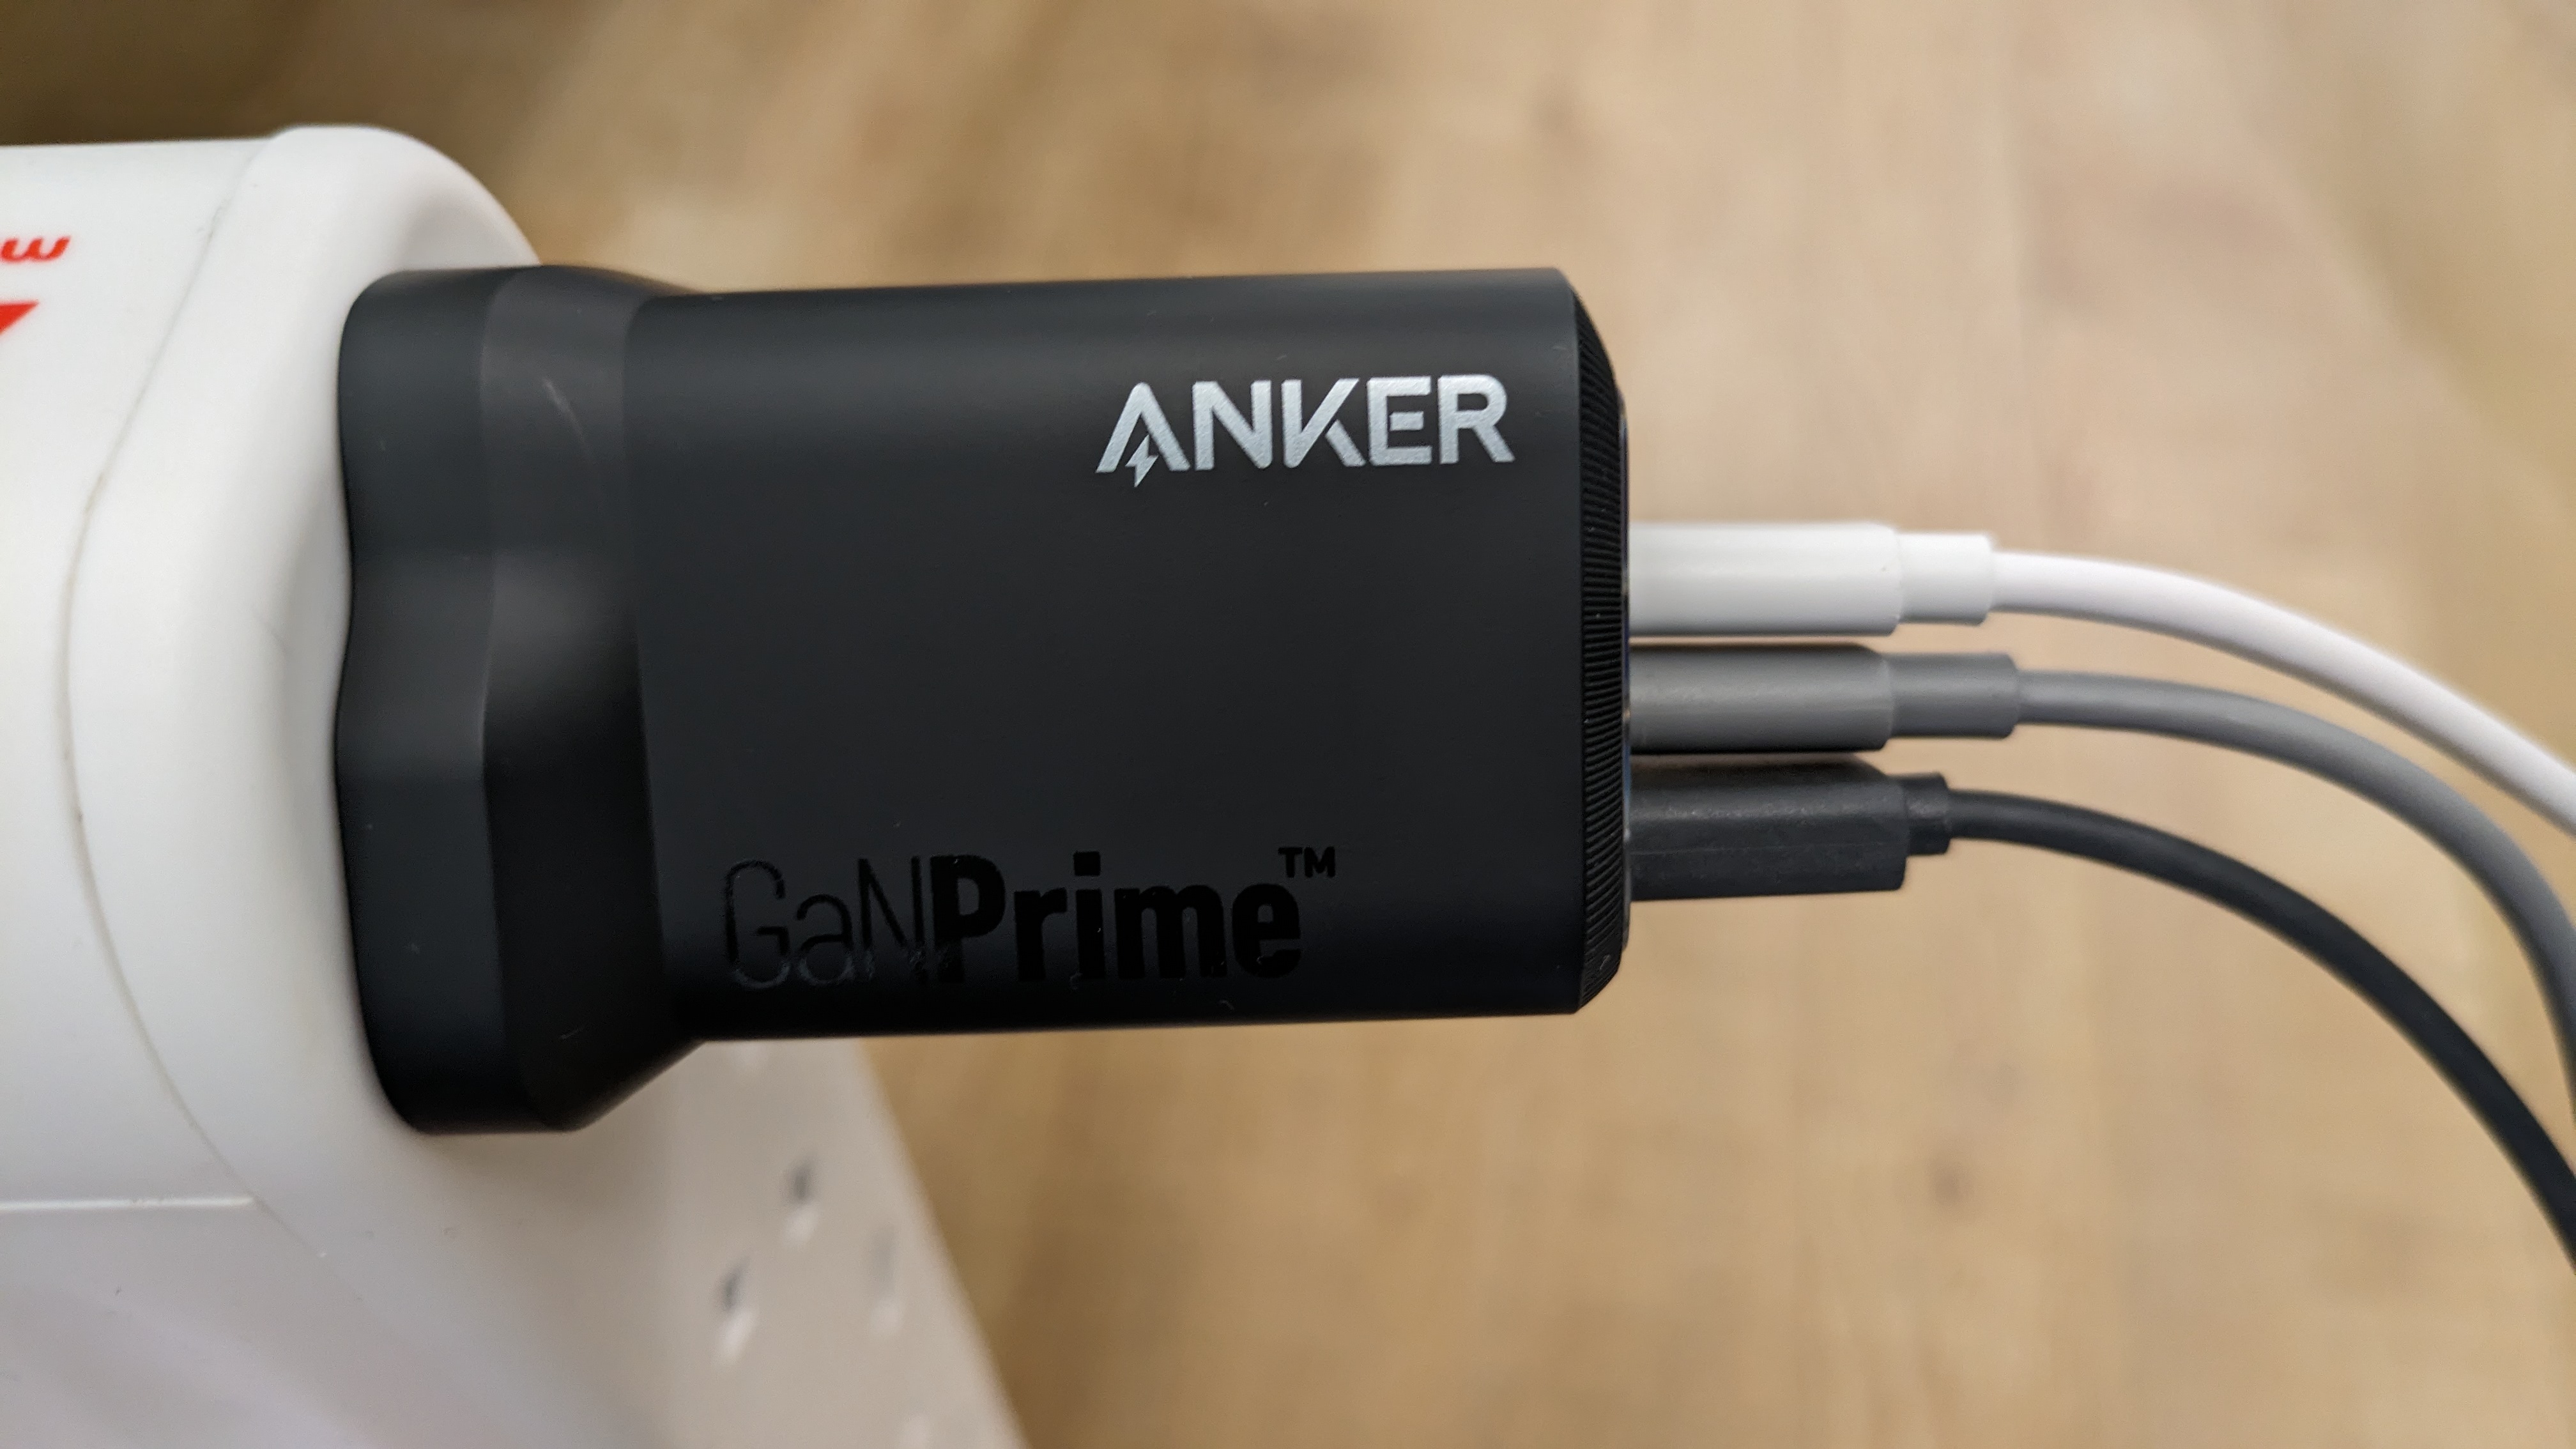 Anker Prime charger plugged into a wall socket, with three cables coming out of it